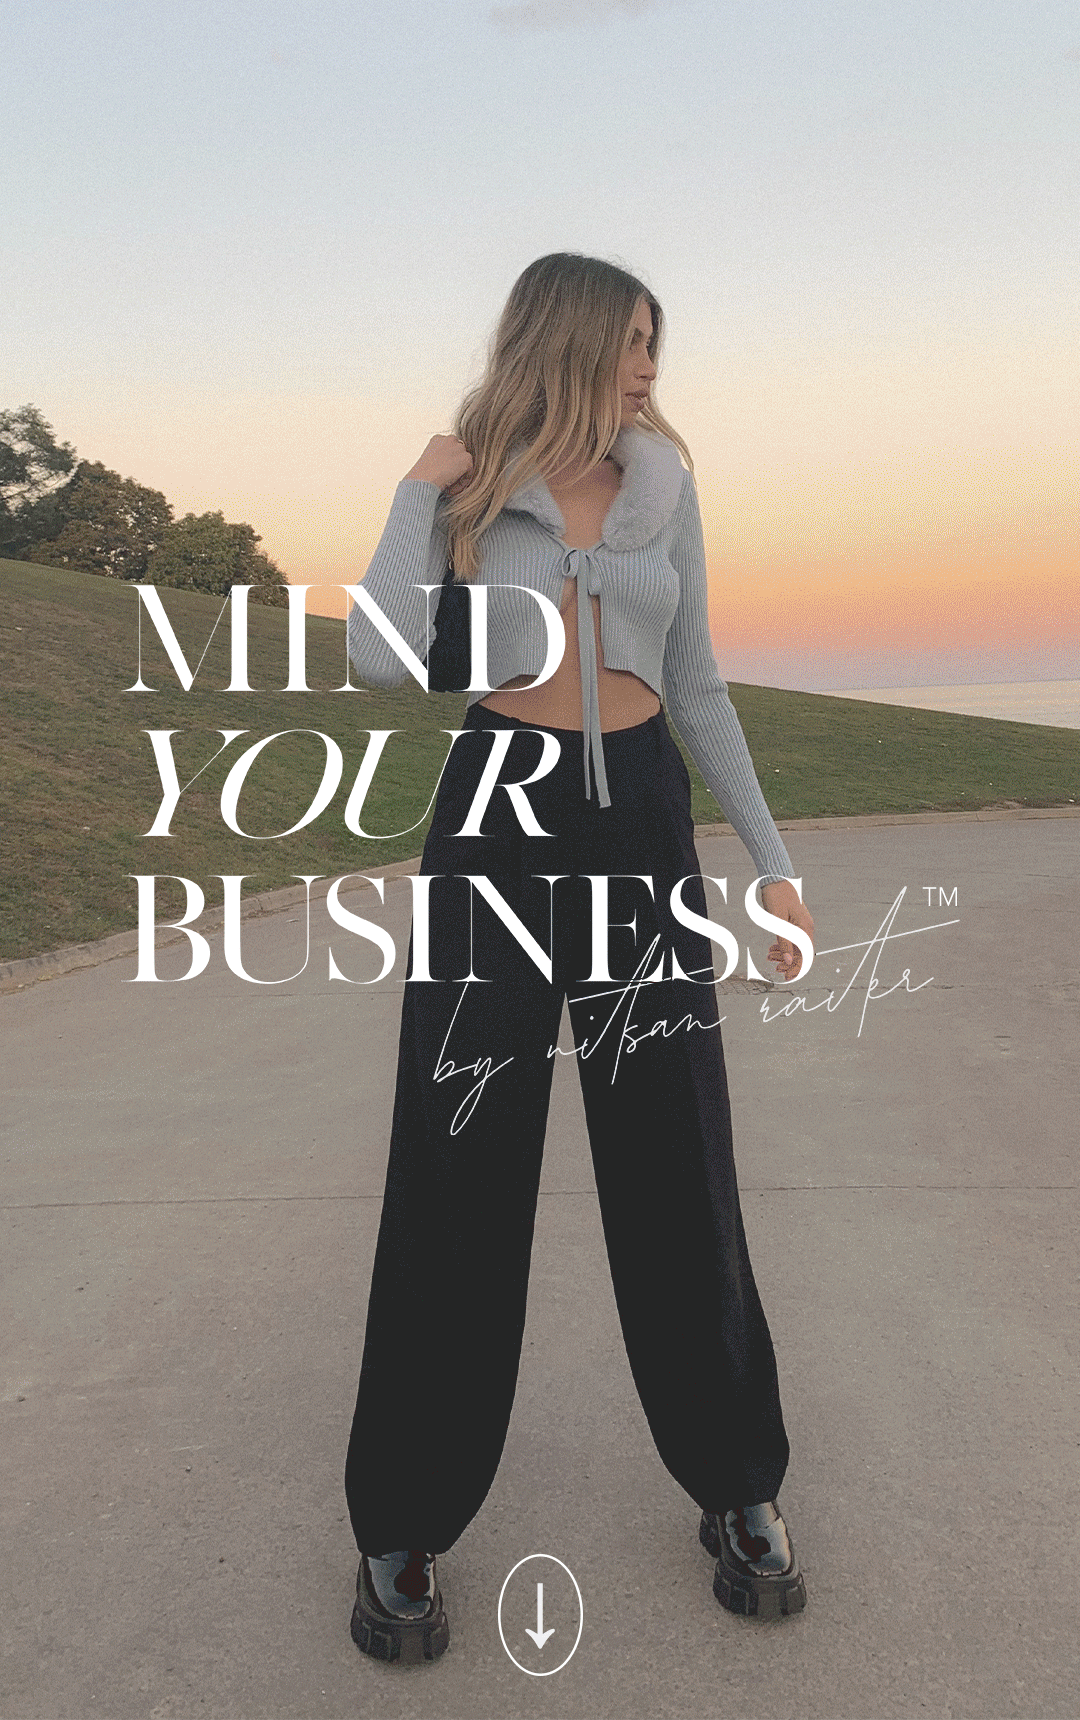 MIND YOUR BUSINESS By Nitsan Raiter™